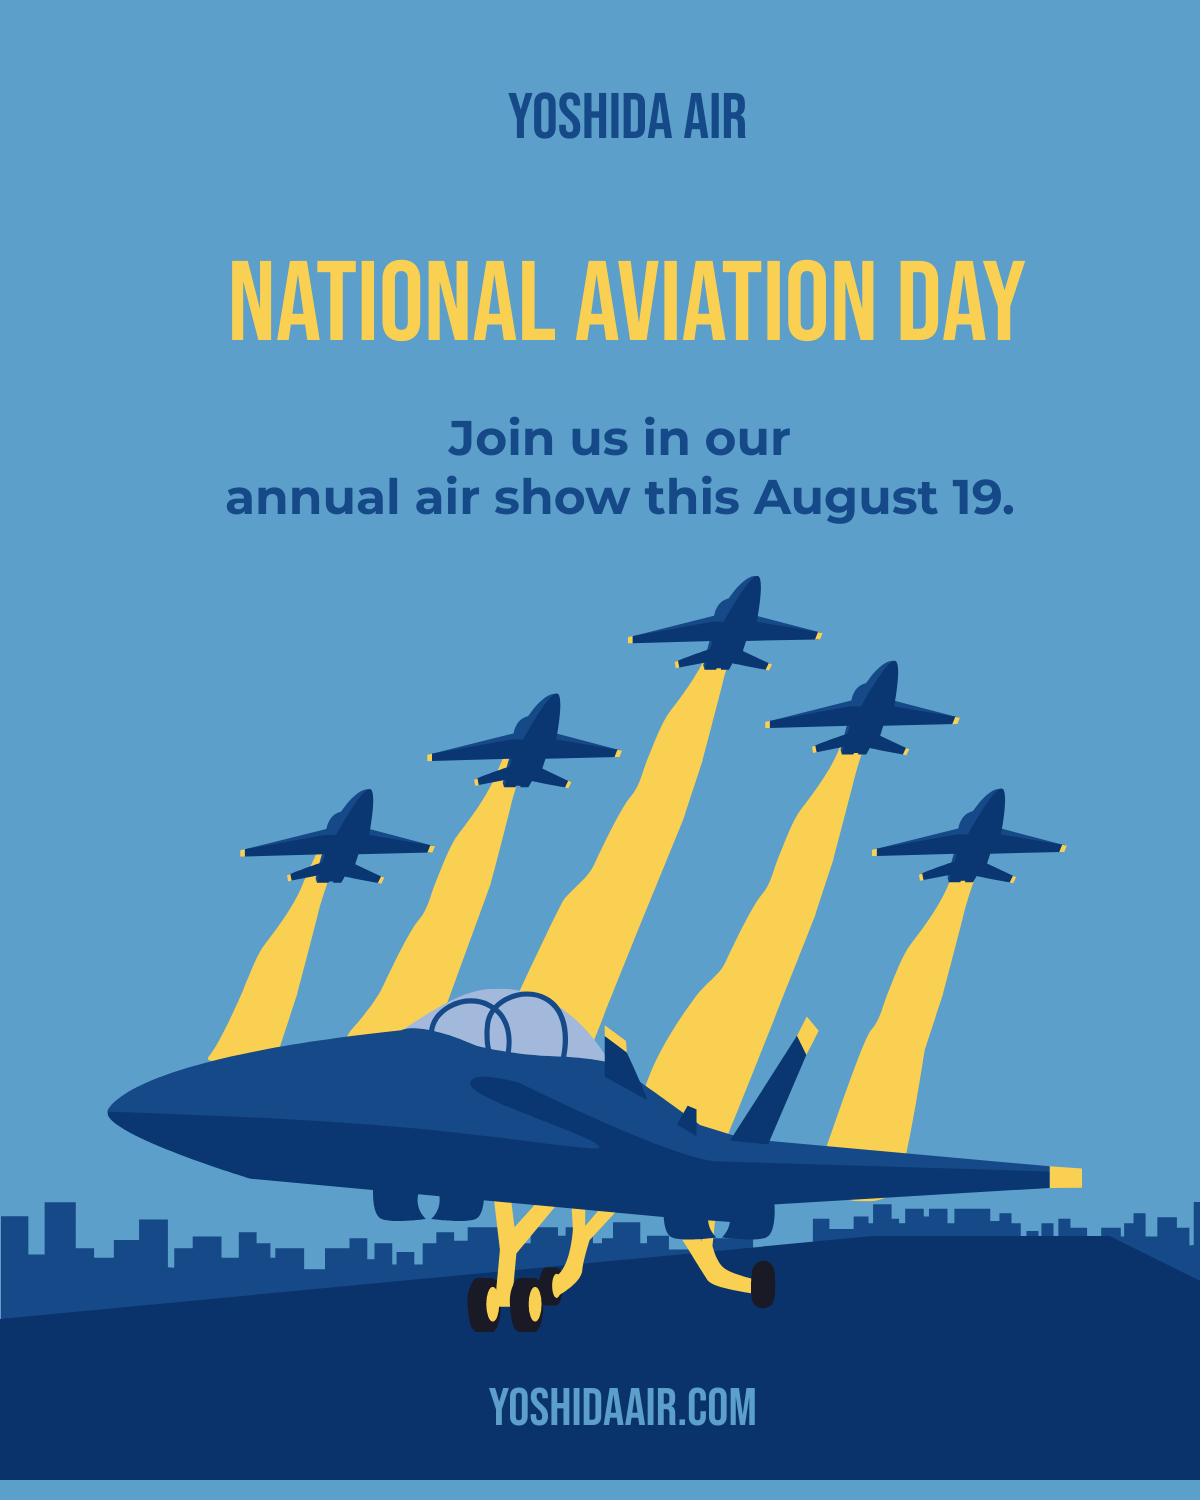 National Aviation Day Facebook Post Template